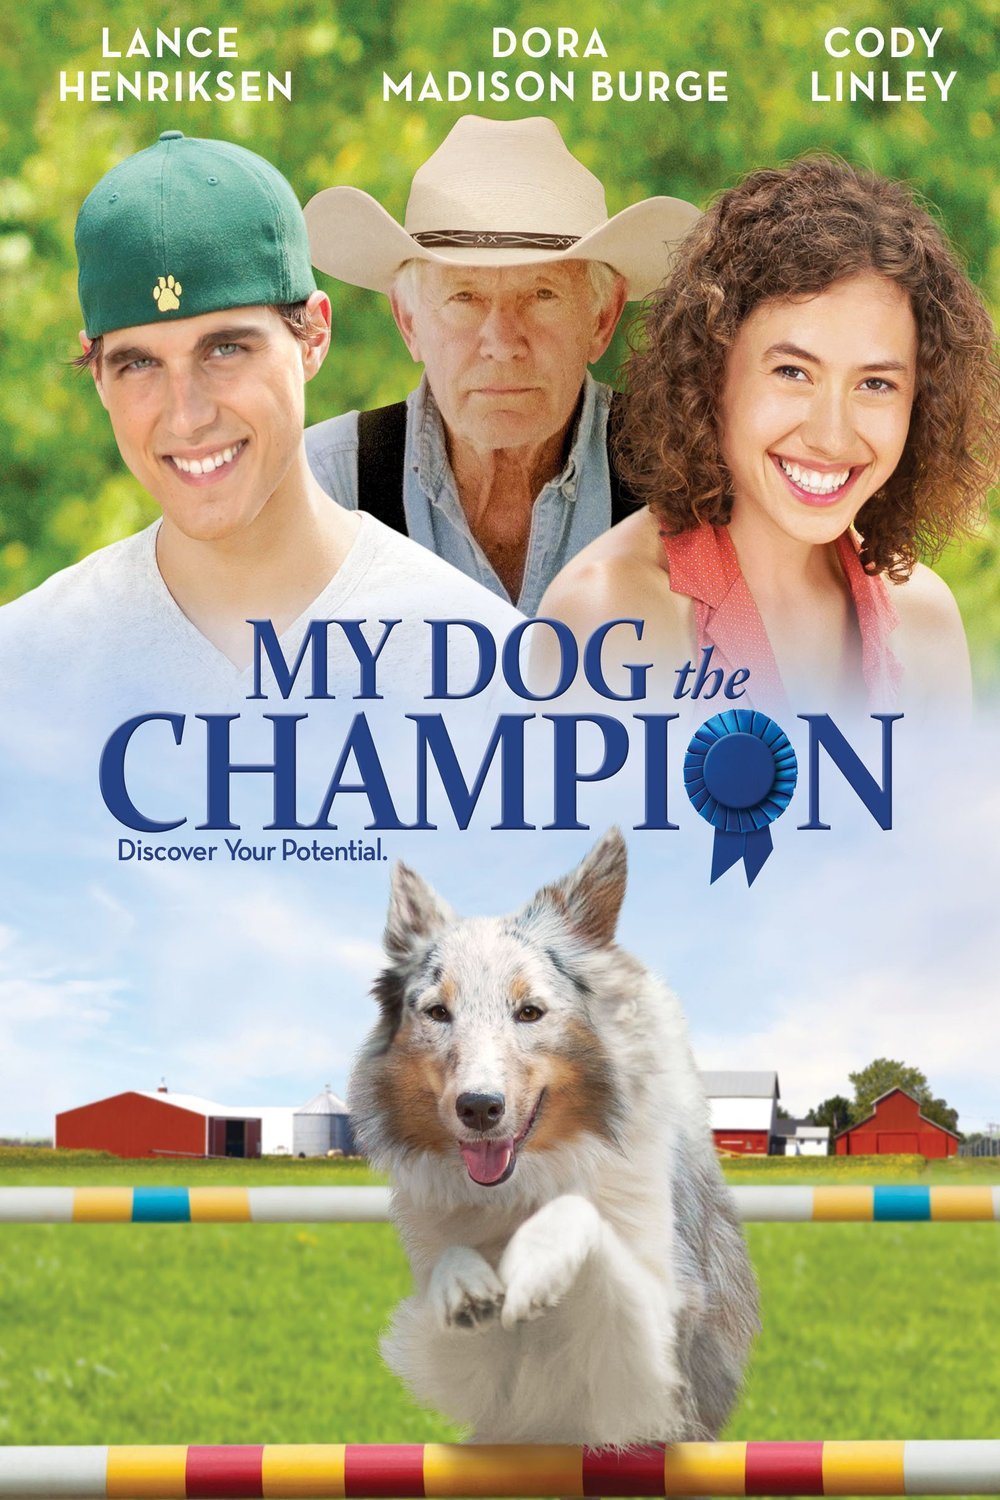 Poster of the movie Champion